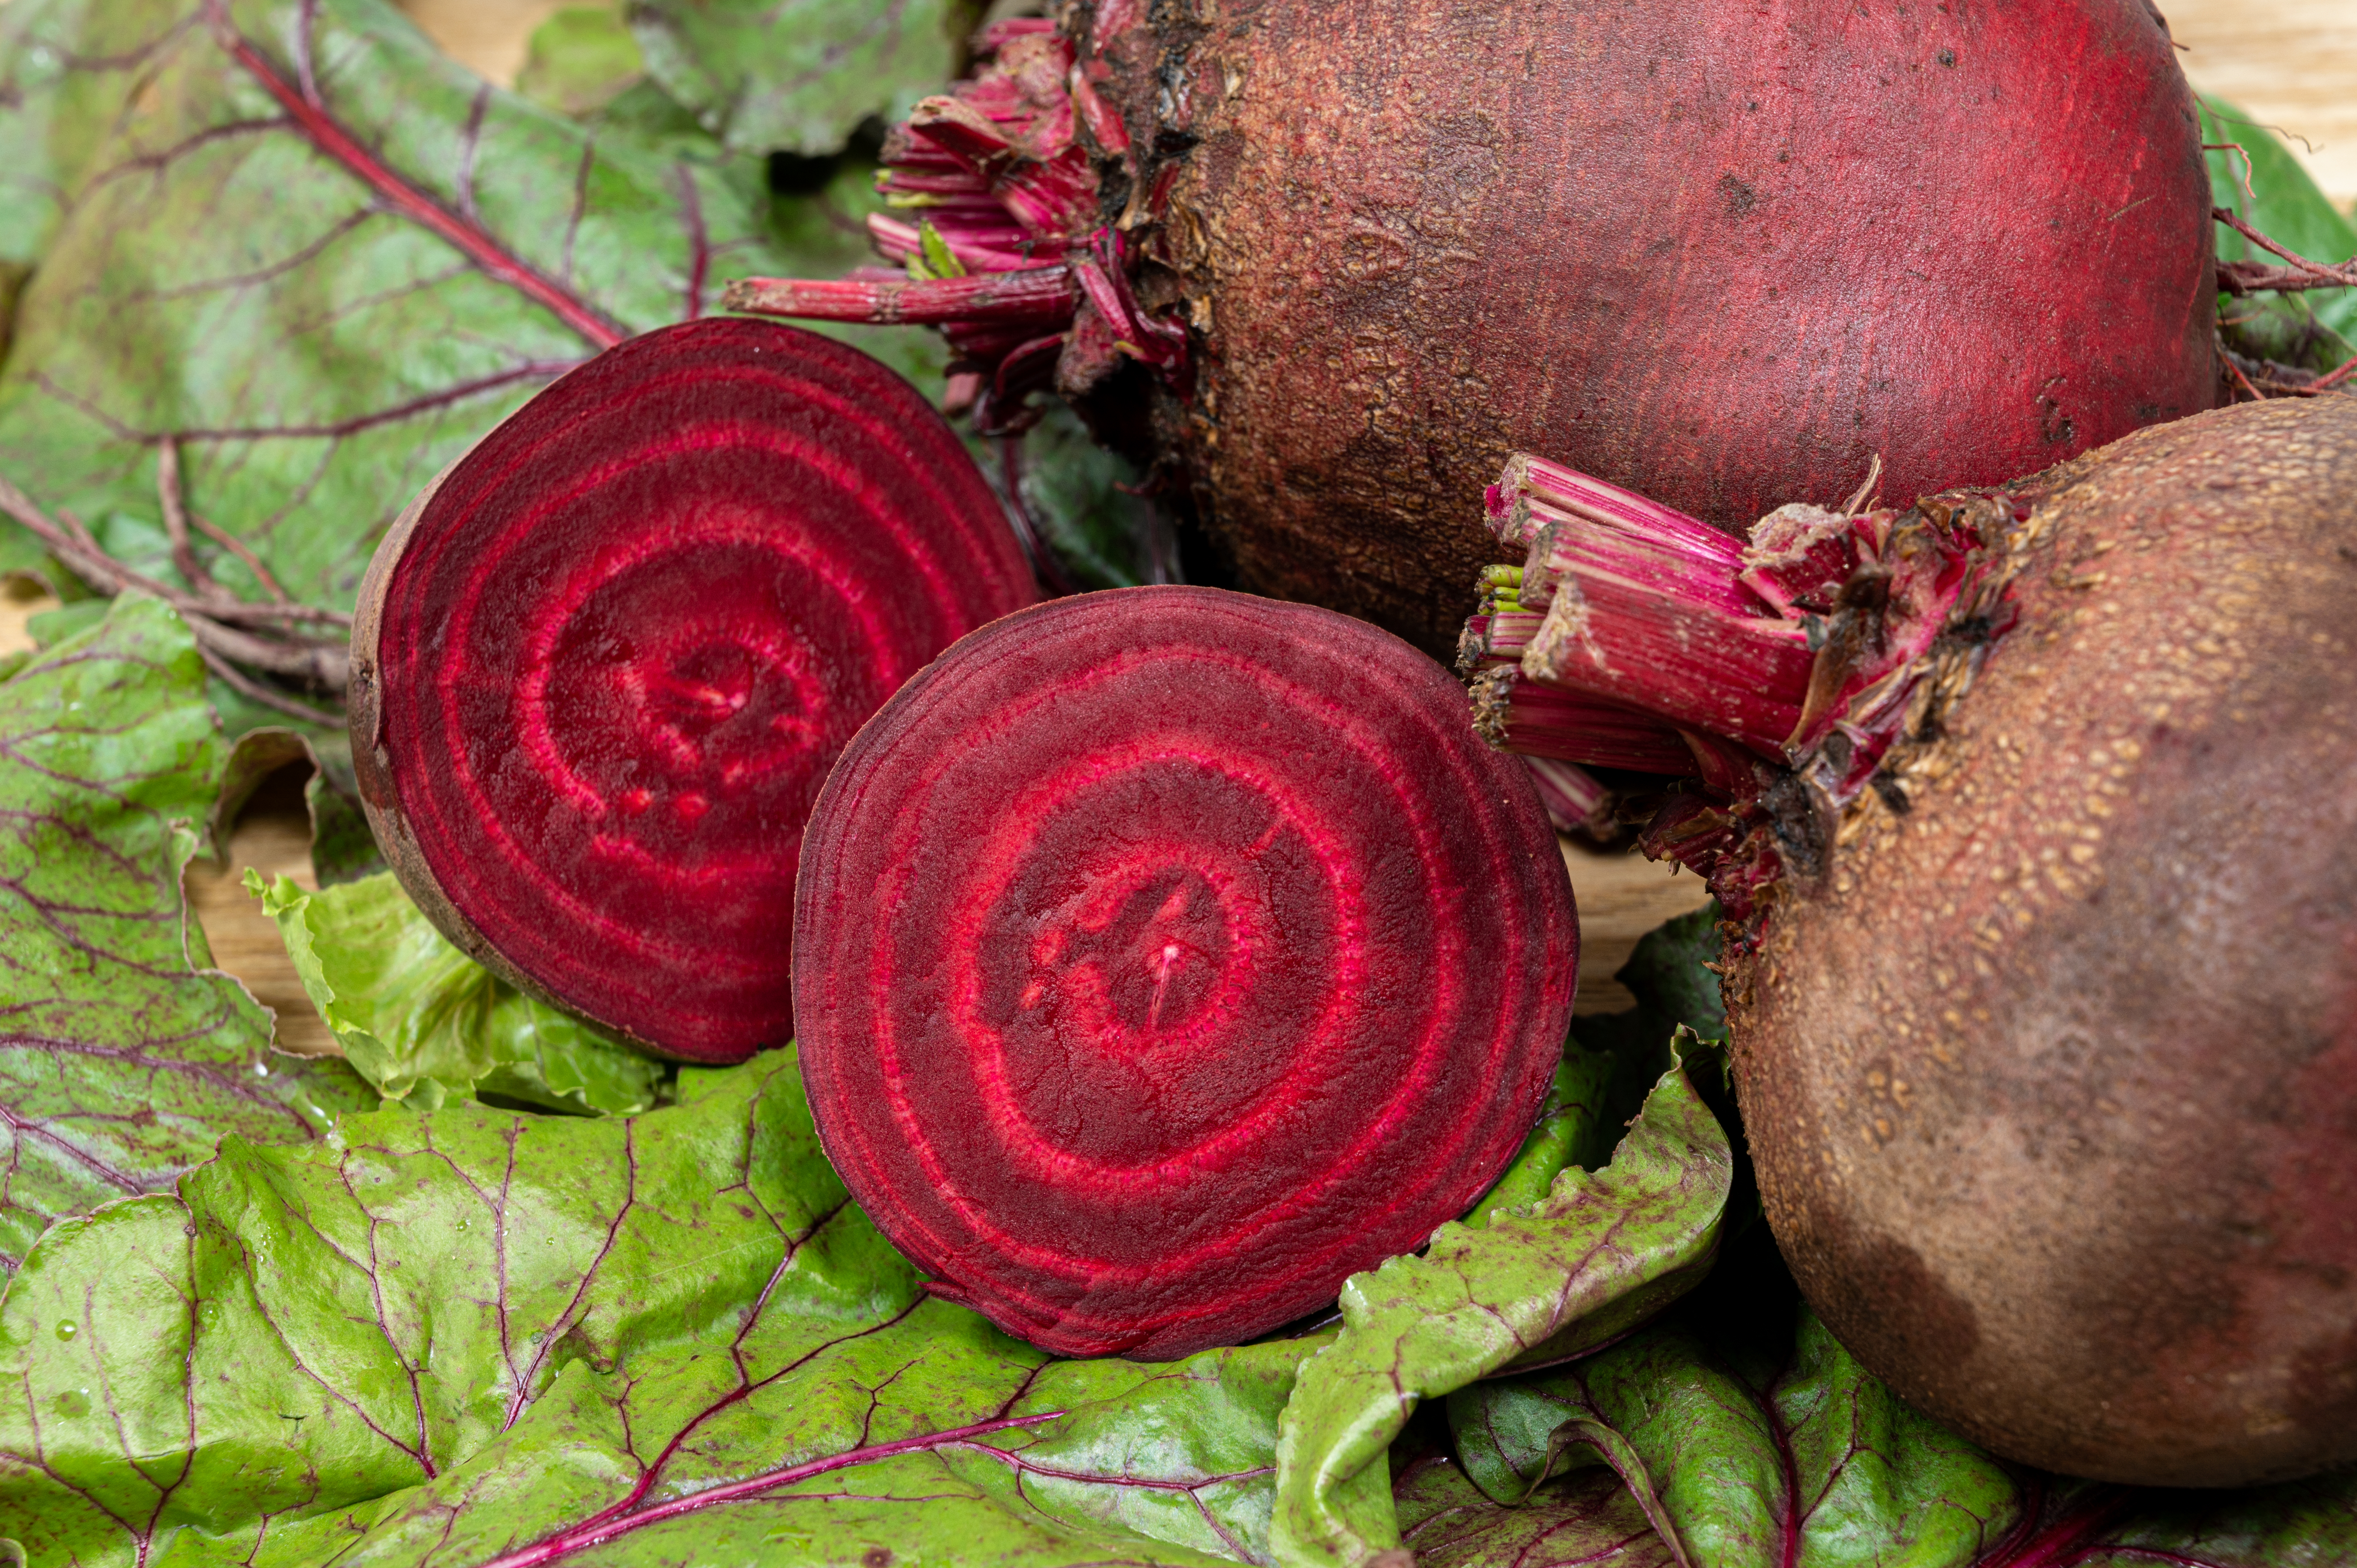 Beets and beet leaves with one beet sliced in half